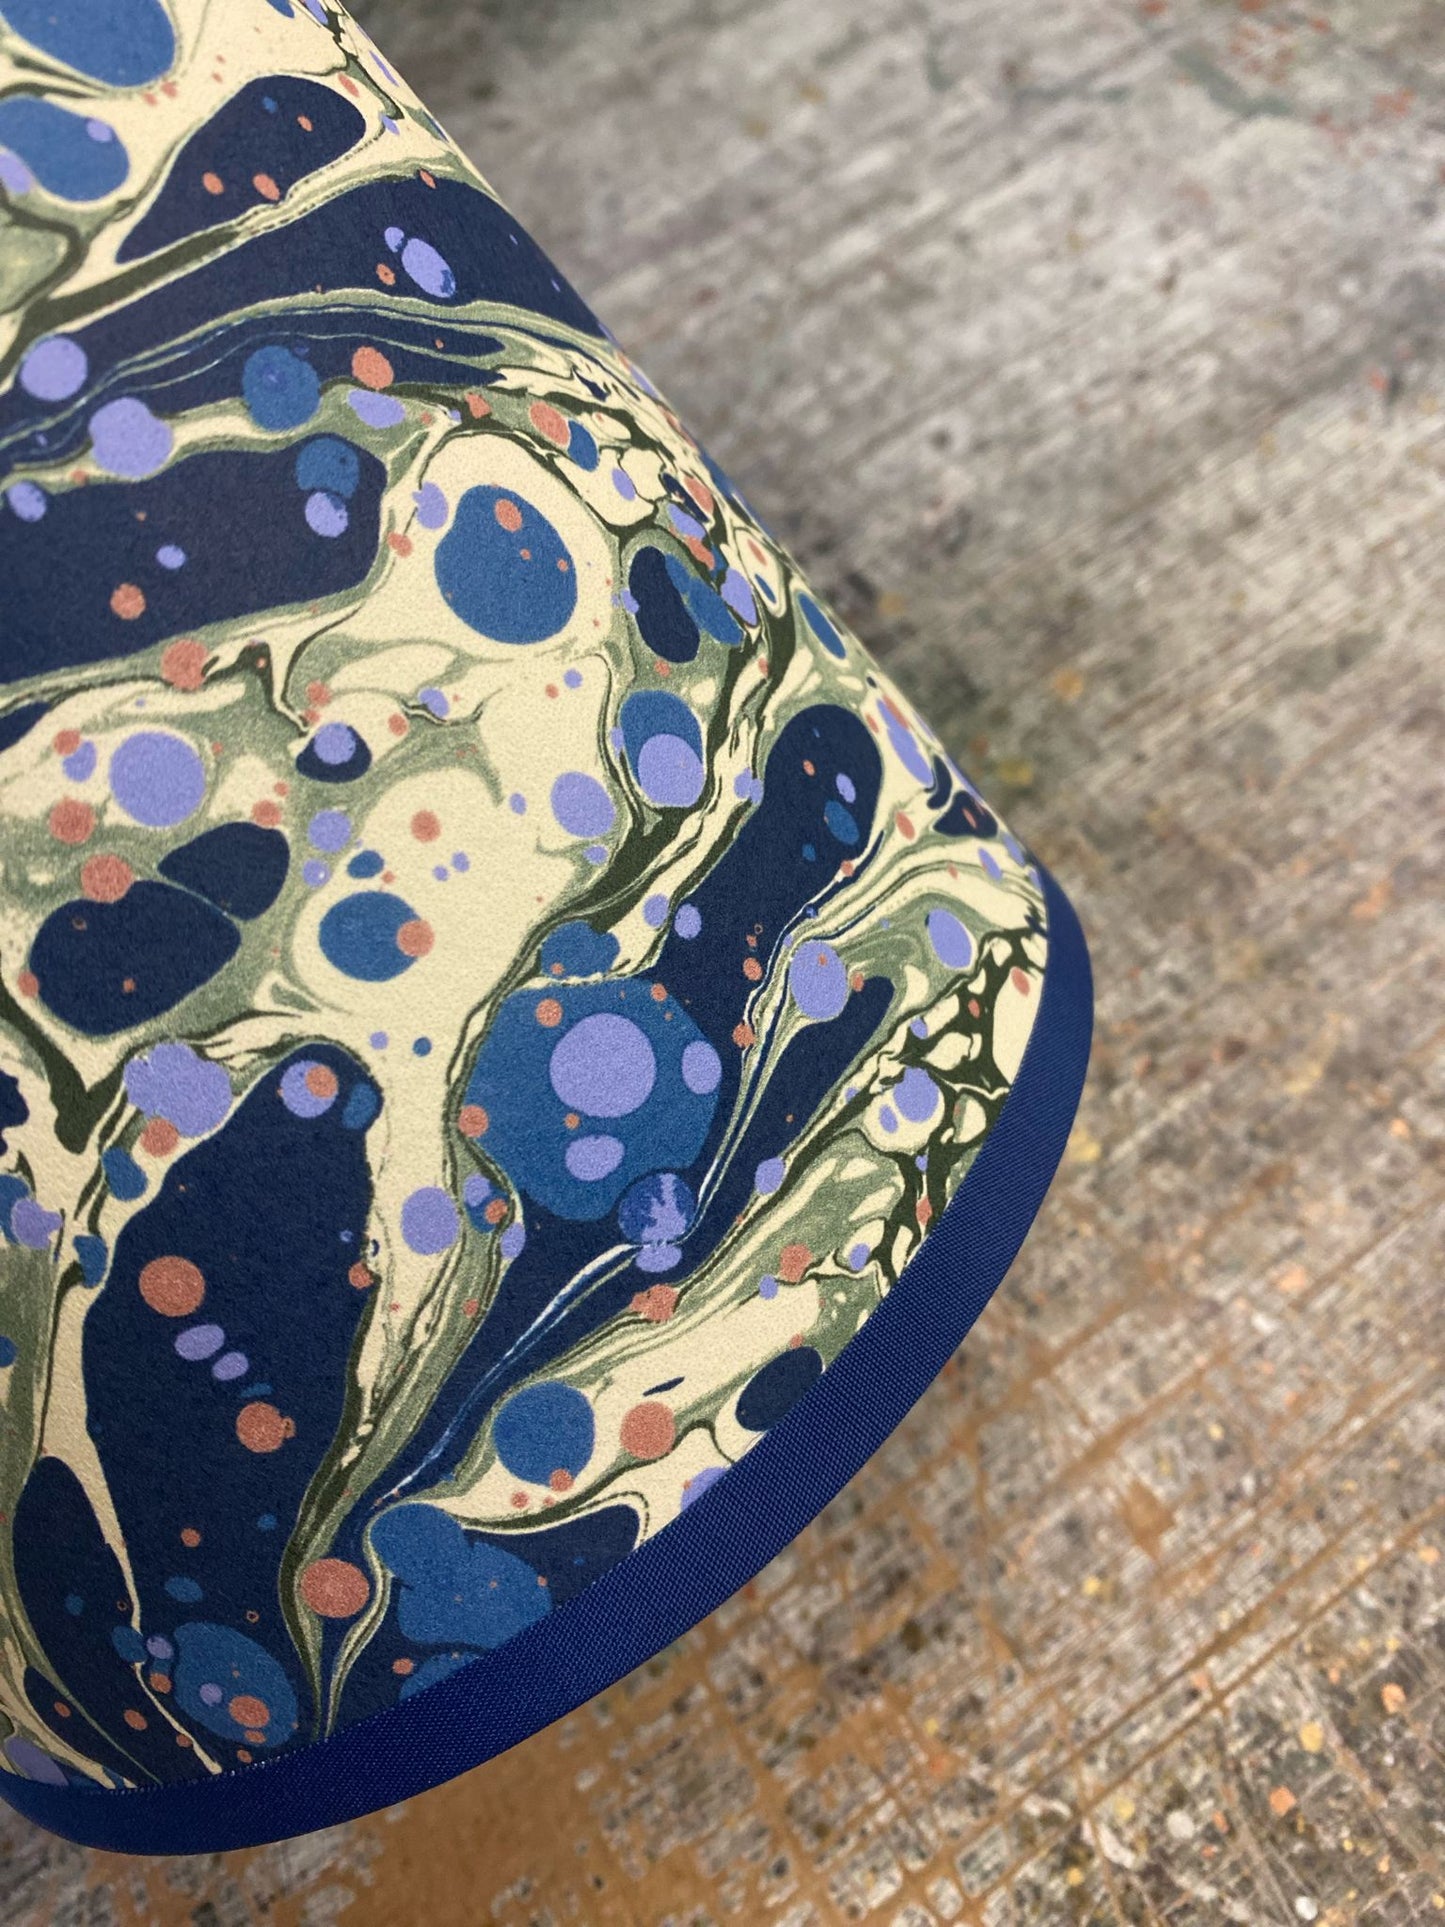 In Stock: House of Amitié Marbled Paper Lampshade - Juniper Blue Anise - Empire - Size Small